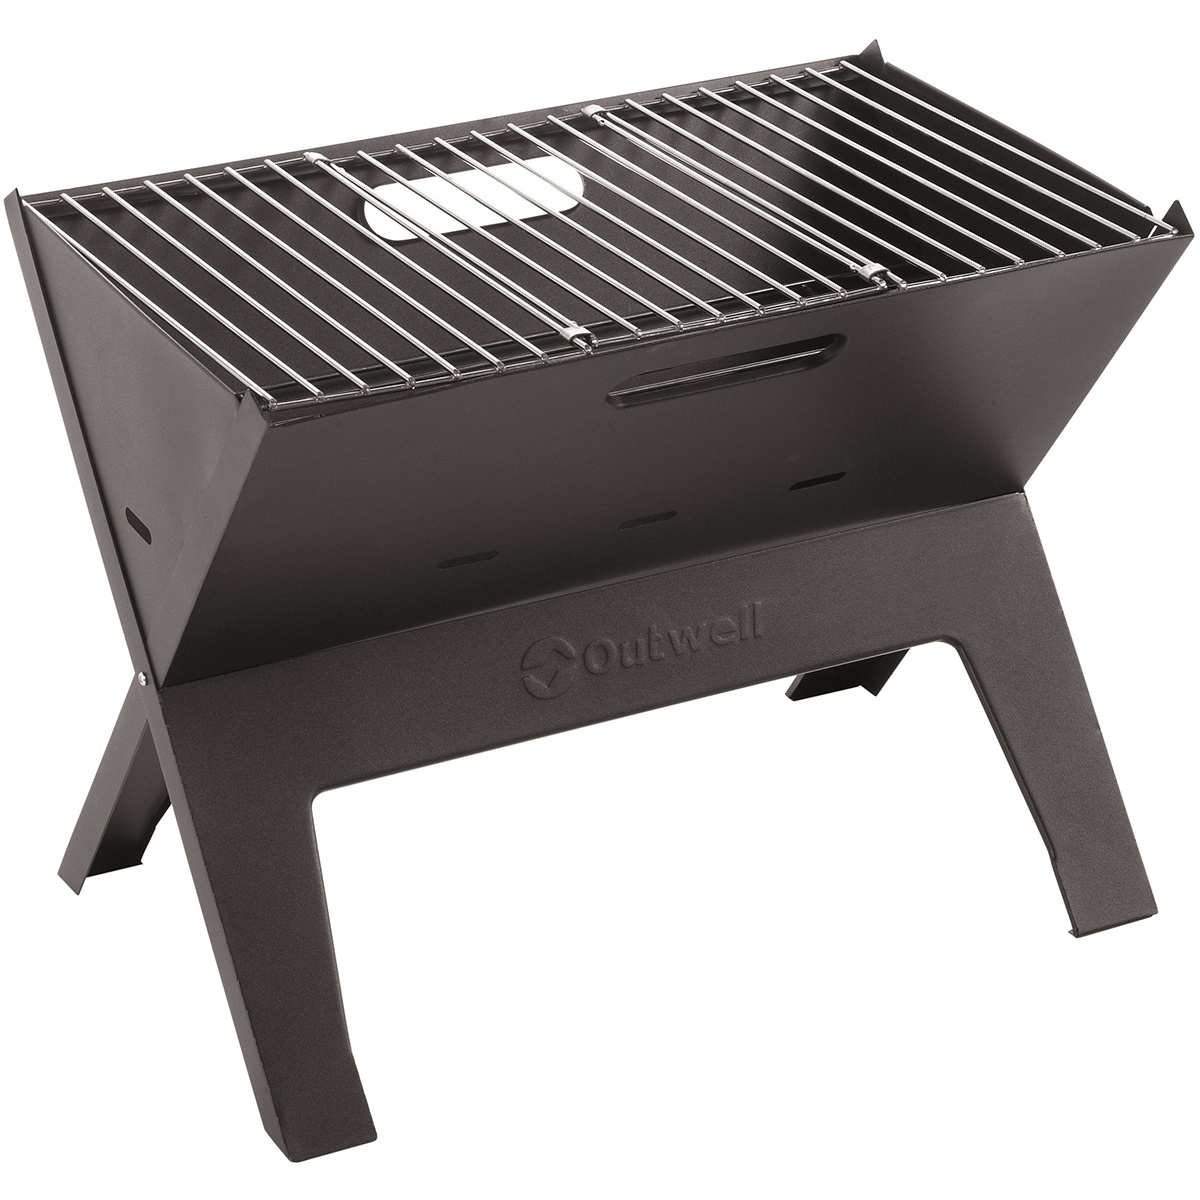 Image of Outwell Grill Cazal Portable